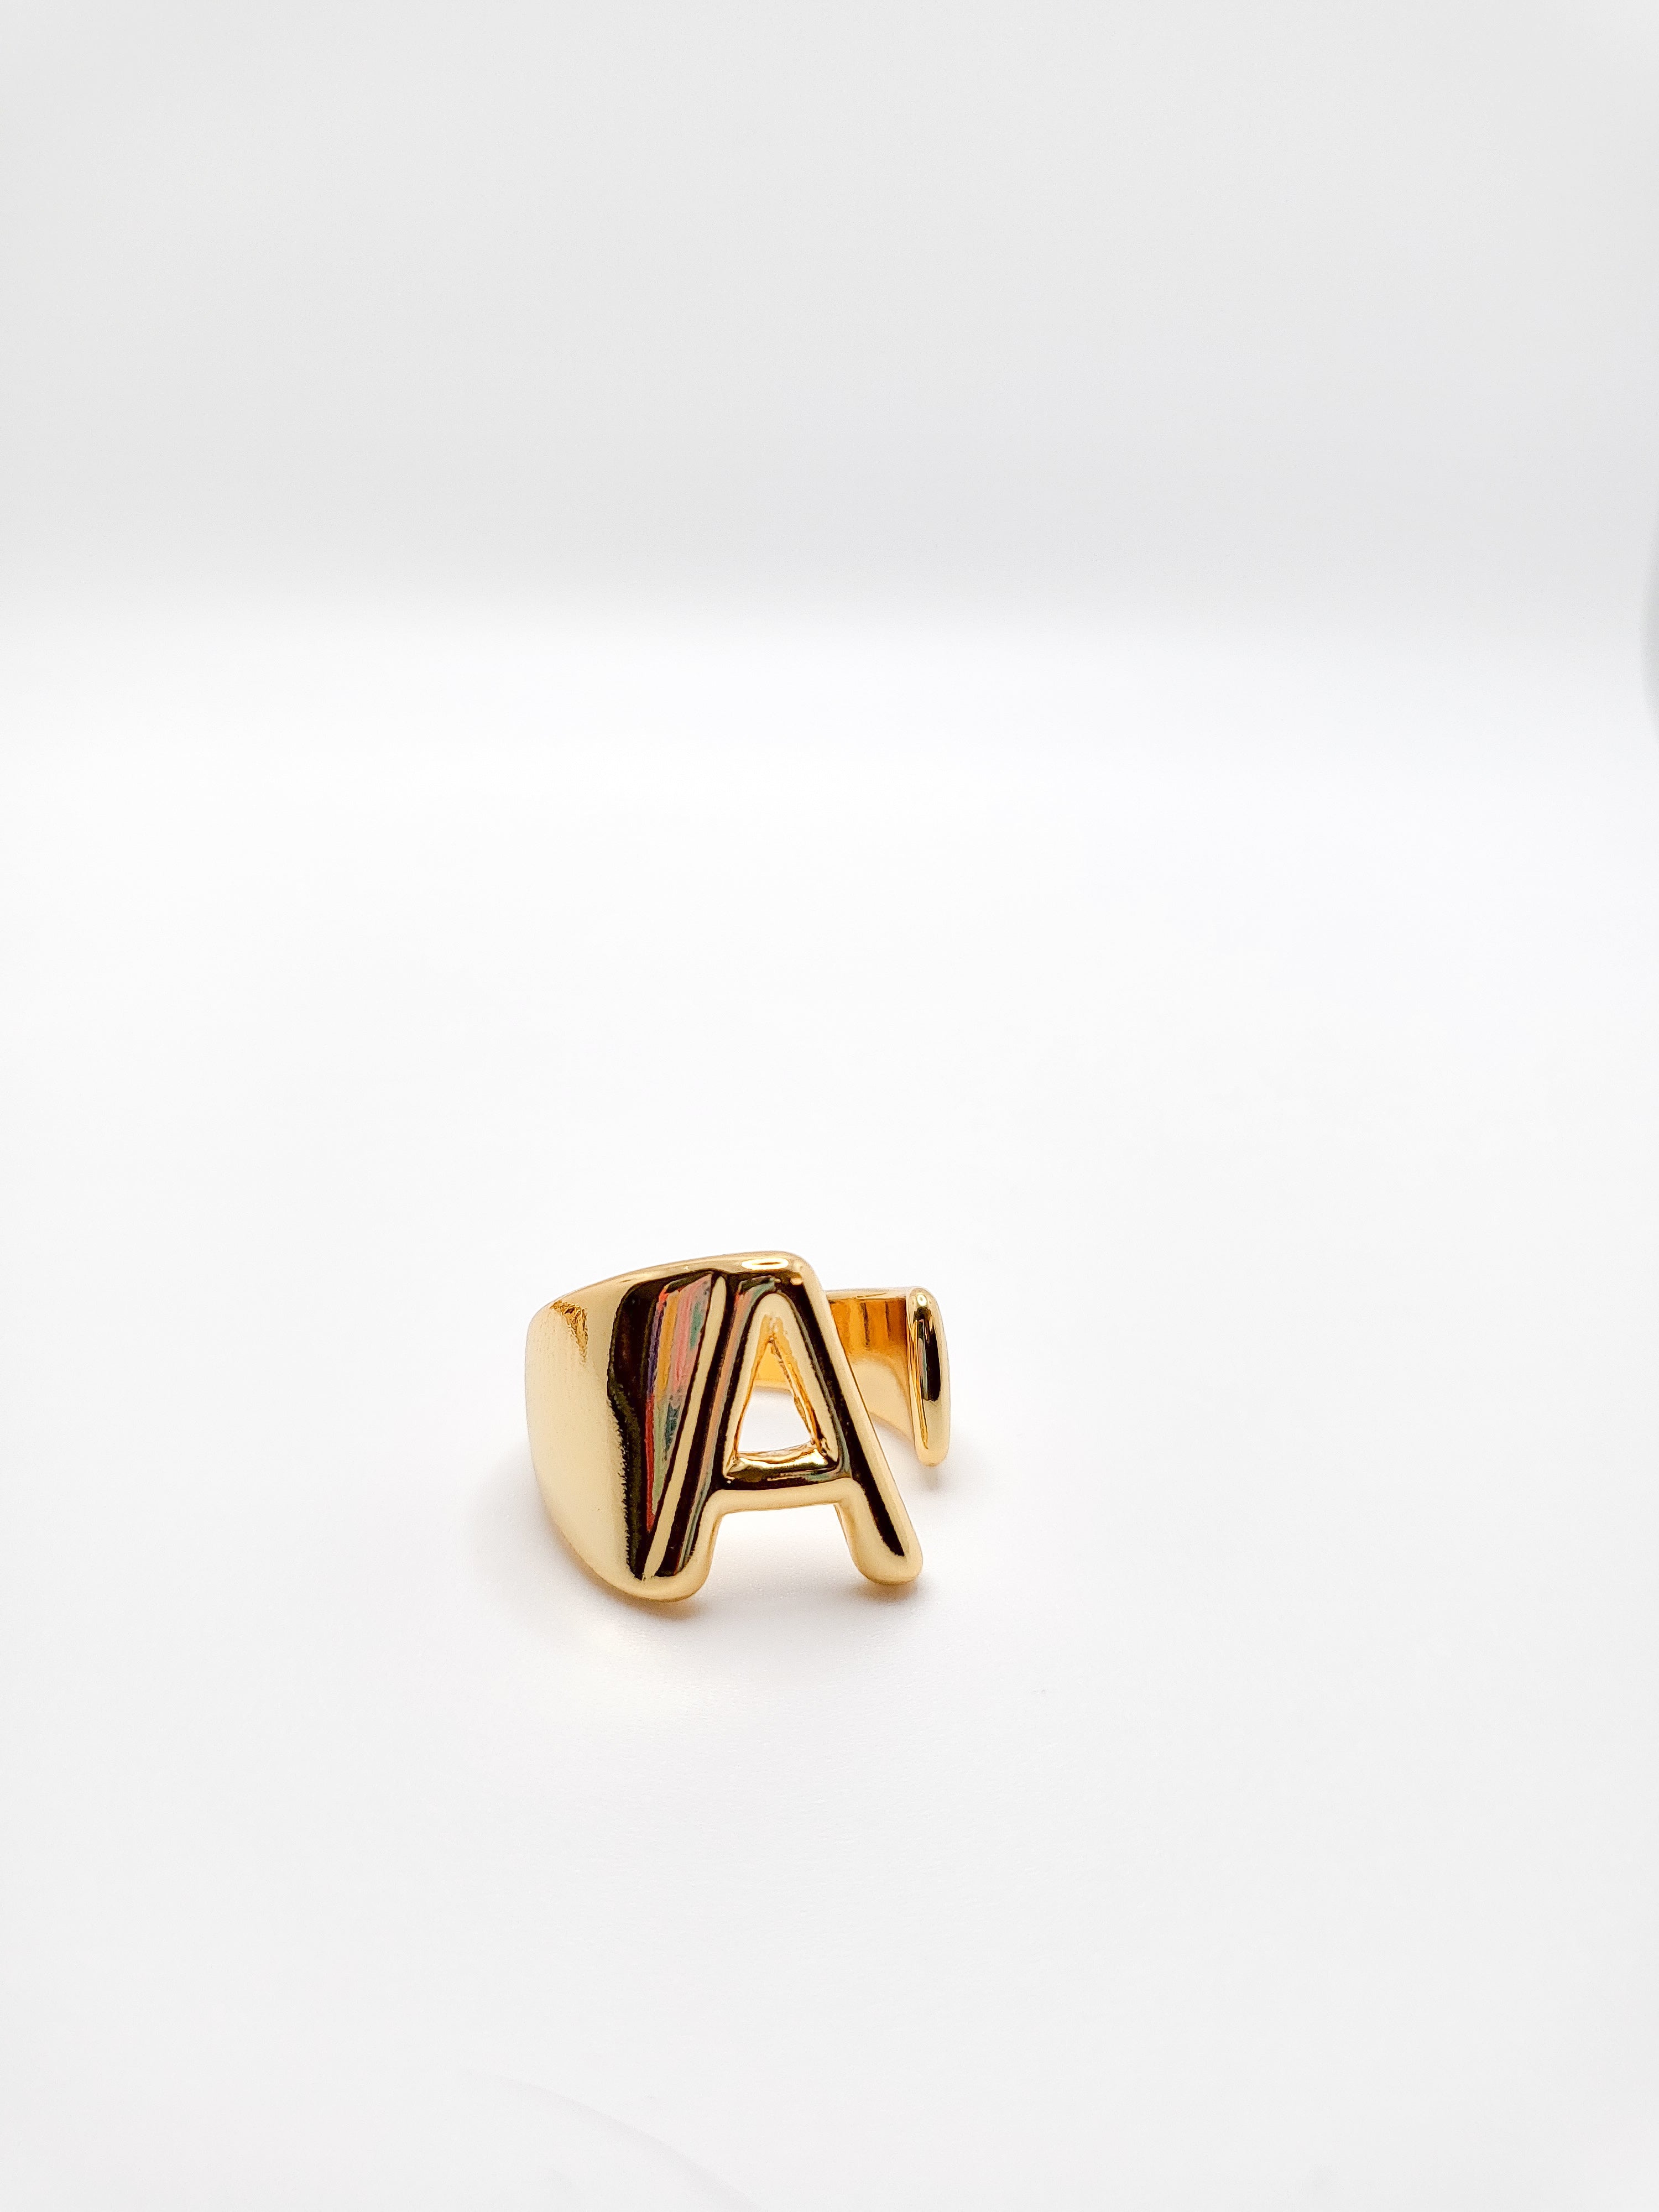 Custom Two Name Rings: Gold Plated 925 Sterling Silver With Raw Cz Diamond